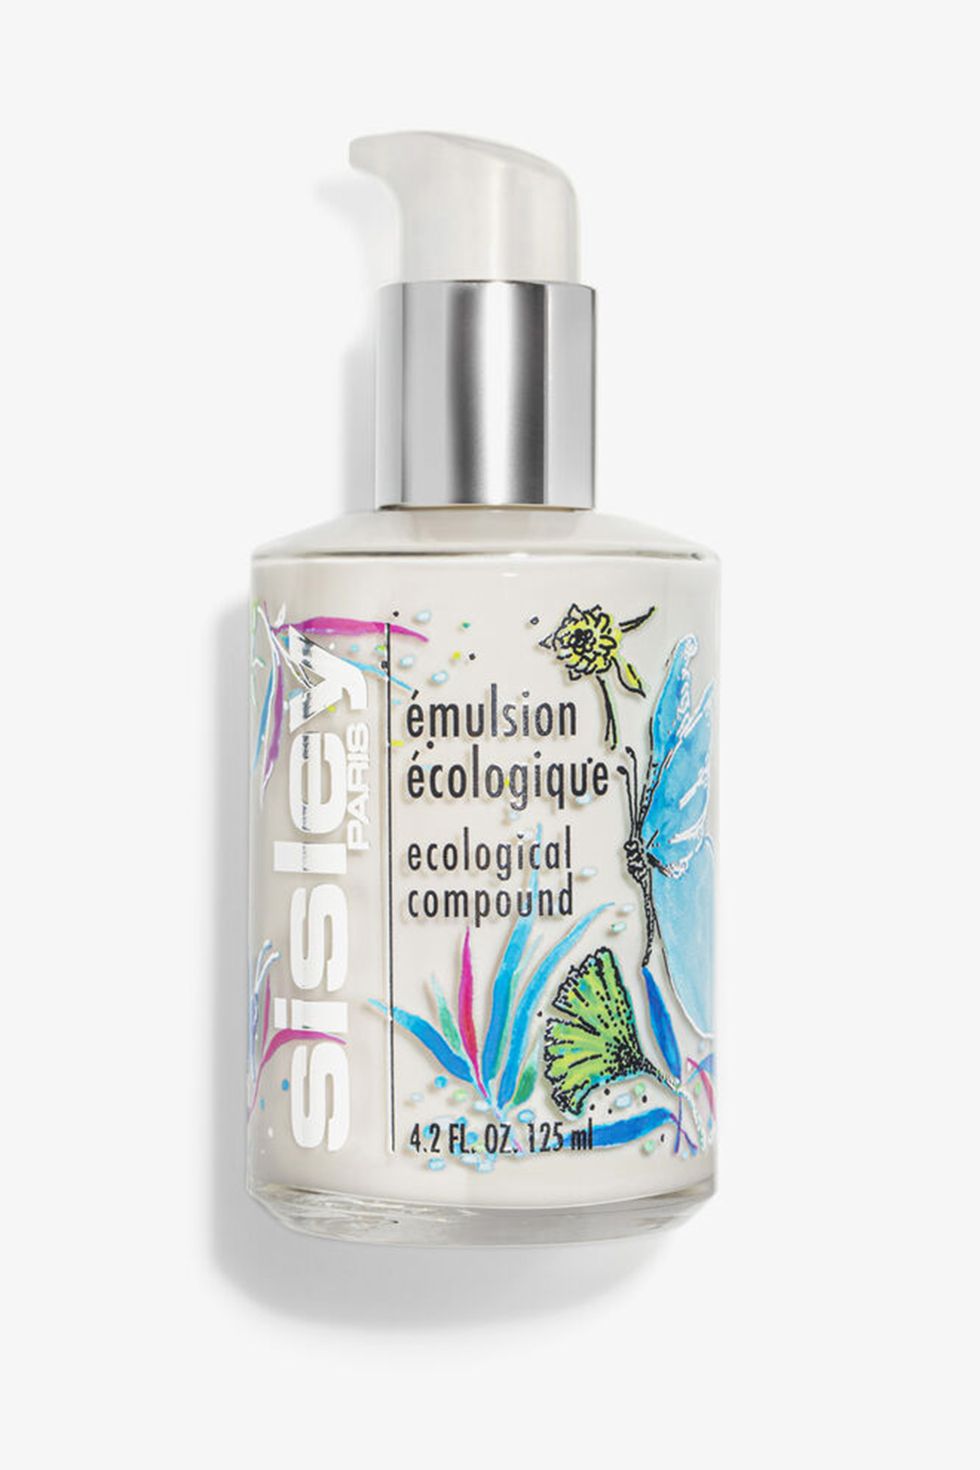 sisley limited edition ecological compound